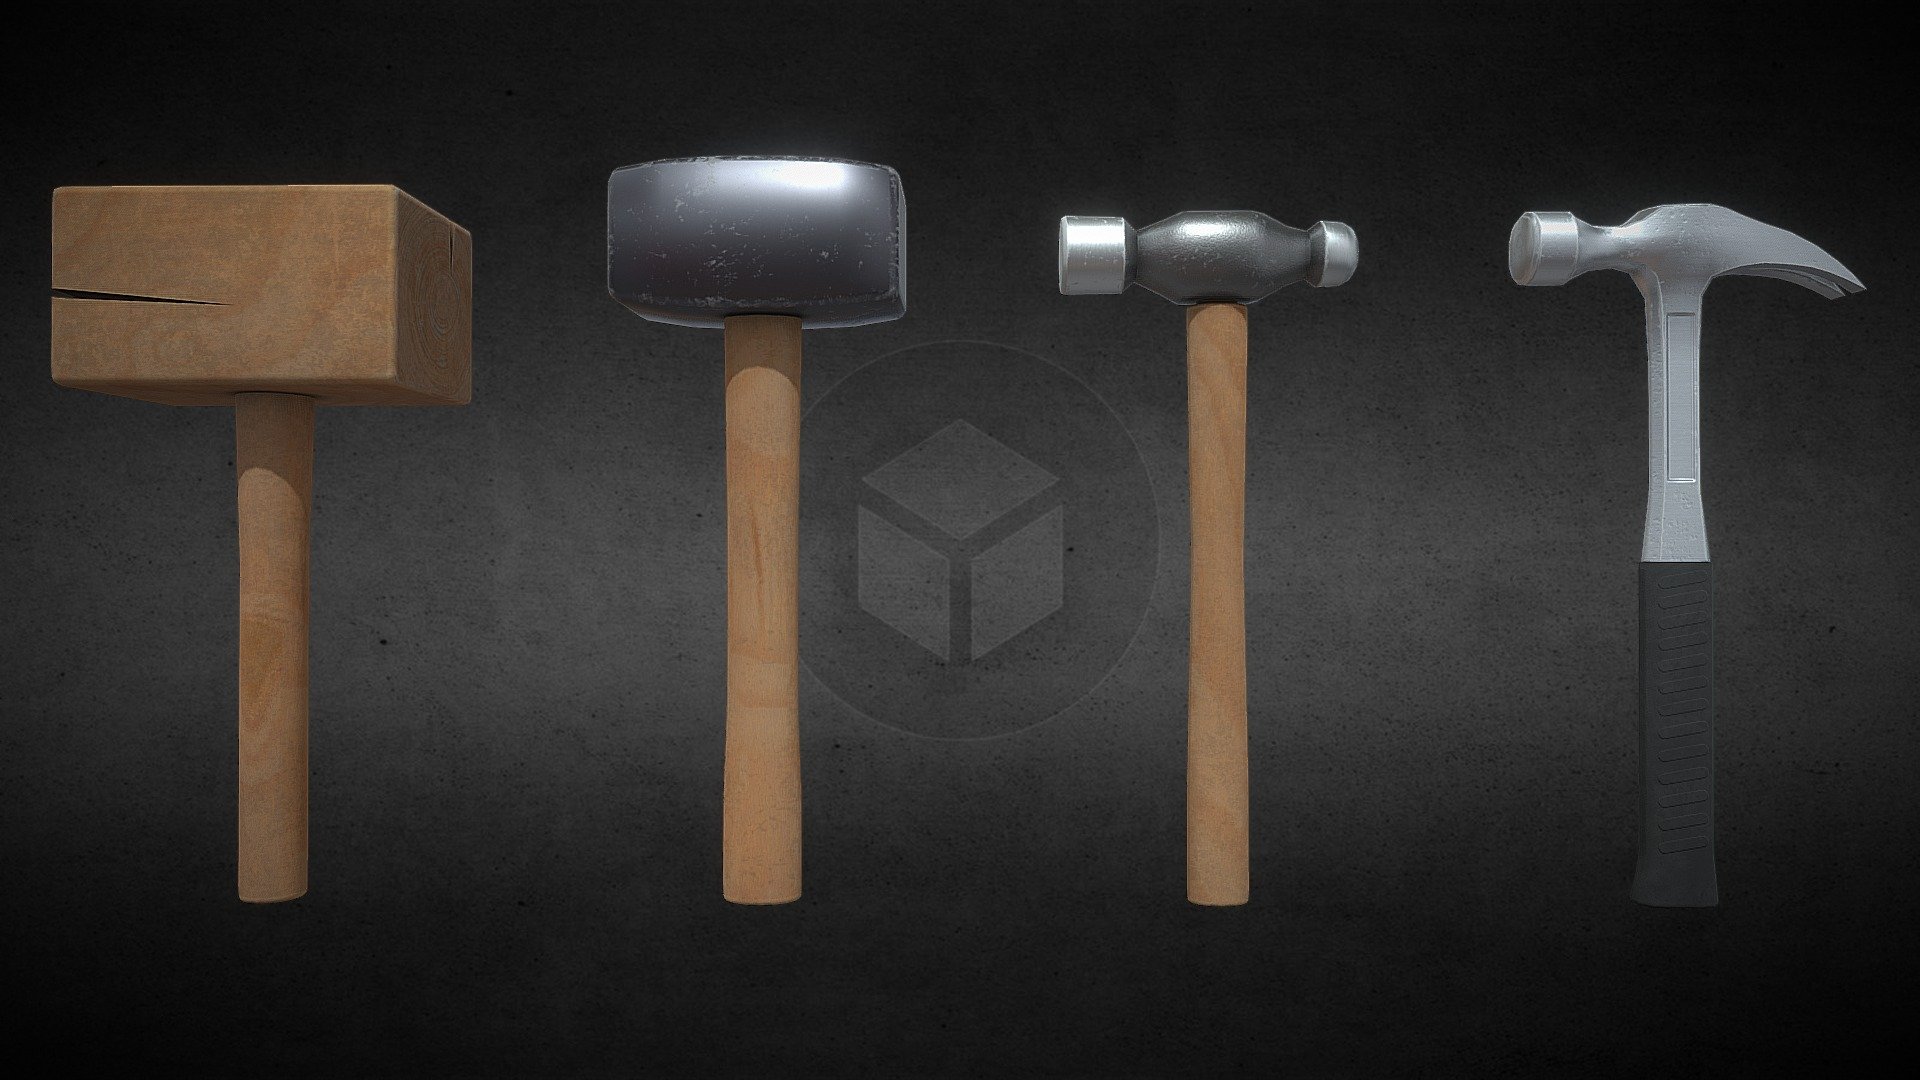 Mallet and hammer models for free to use in your projects.

Including:
- Wooden Mallet
- Club Hammer
- Ball Peen Hammer
- Claw Hammer

Game ready assets, tested in Unity. 4K textures.

If you like the models, please consider pressing the like button as a thanks and follow for more free content ;) - Wooden Mallet and Hammers, Low Poly, Free Assets - Download Free 3D model by Harri Snellman (@rivetech) 3d model